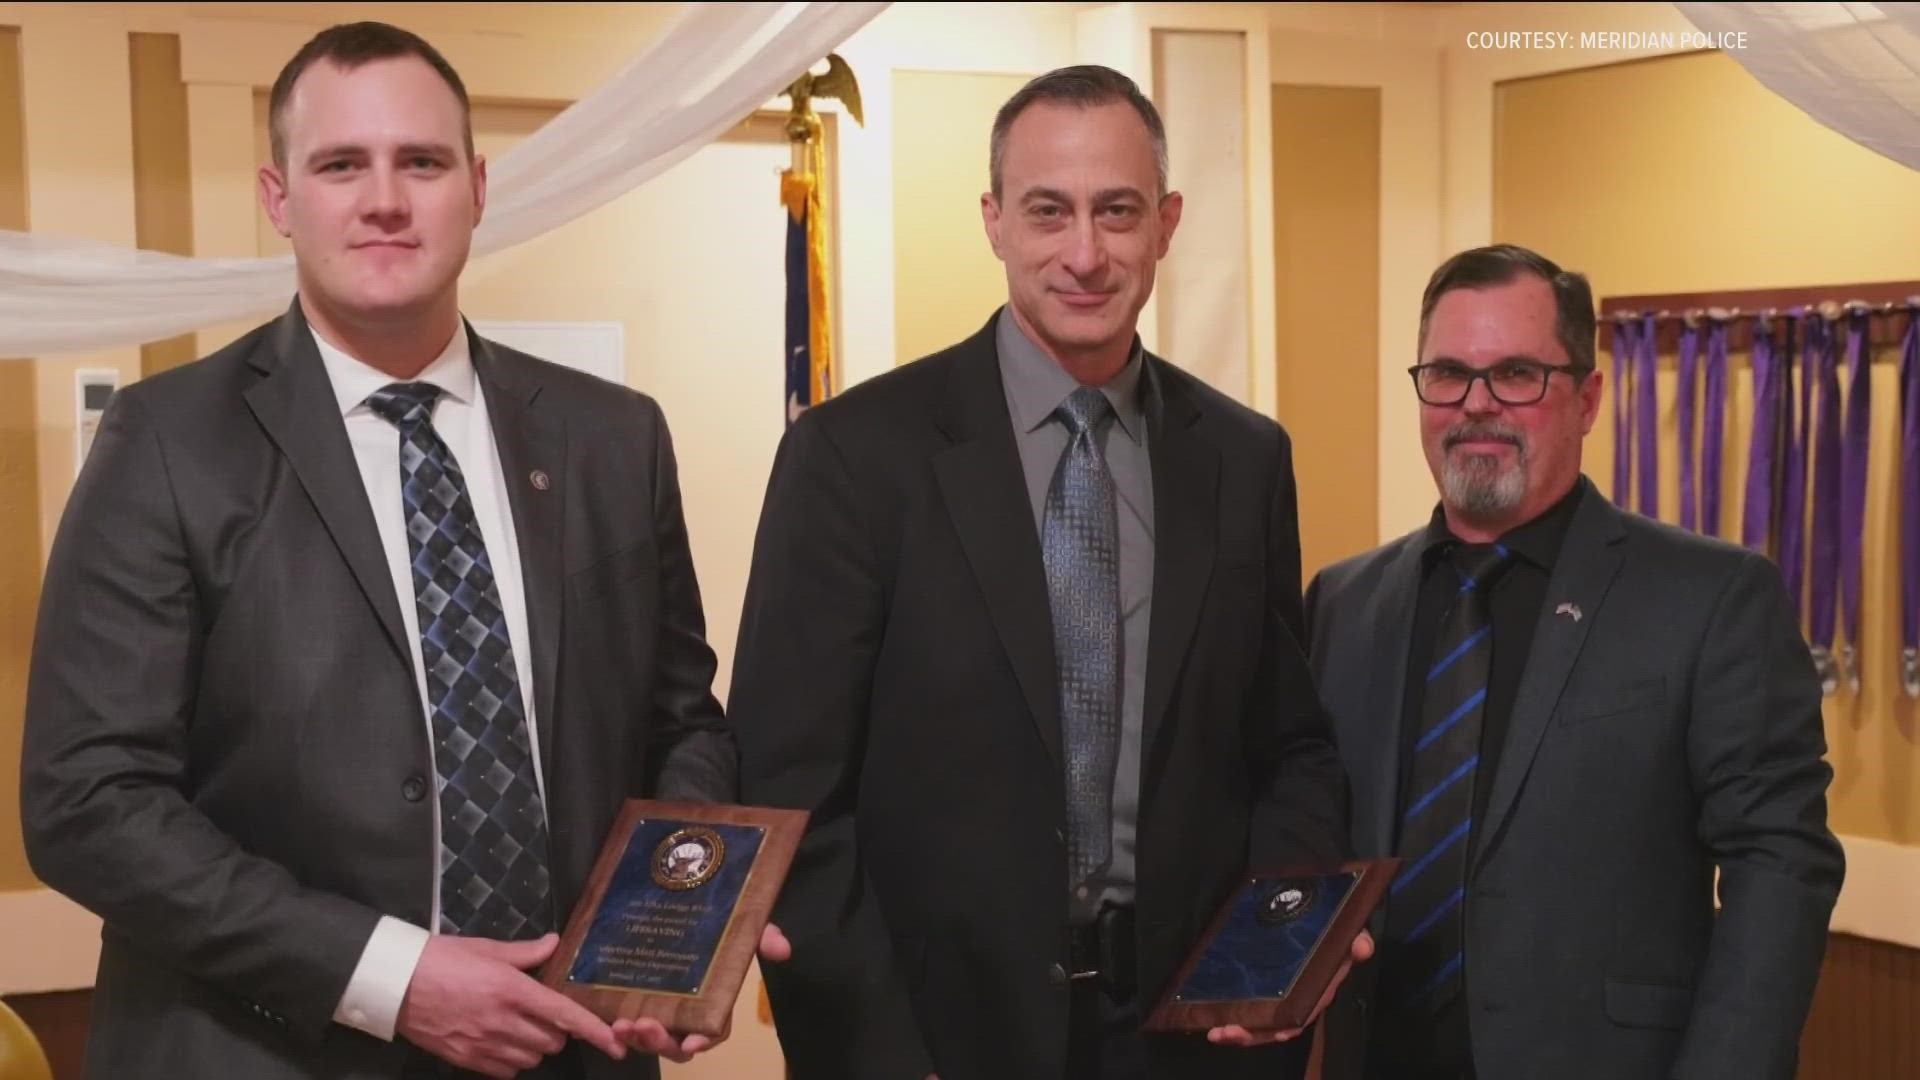 Detectives Matt Ferronato and Eric Stoffle with Meridian Police were recognized with the Life Saving Award for their efforts to bring a missing 77-year-old man home.